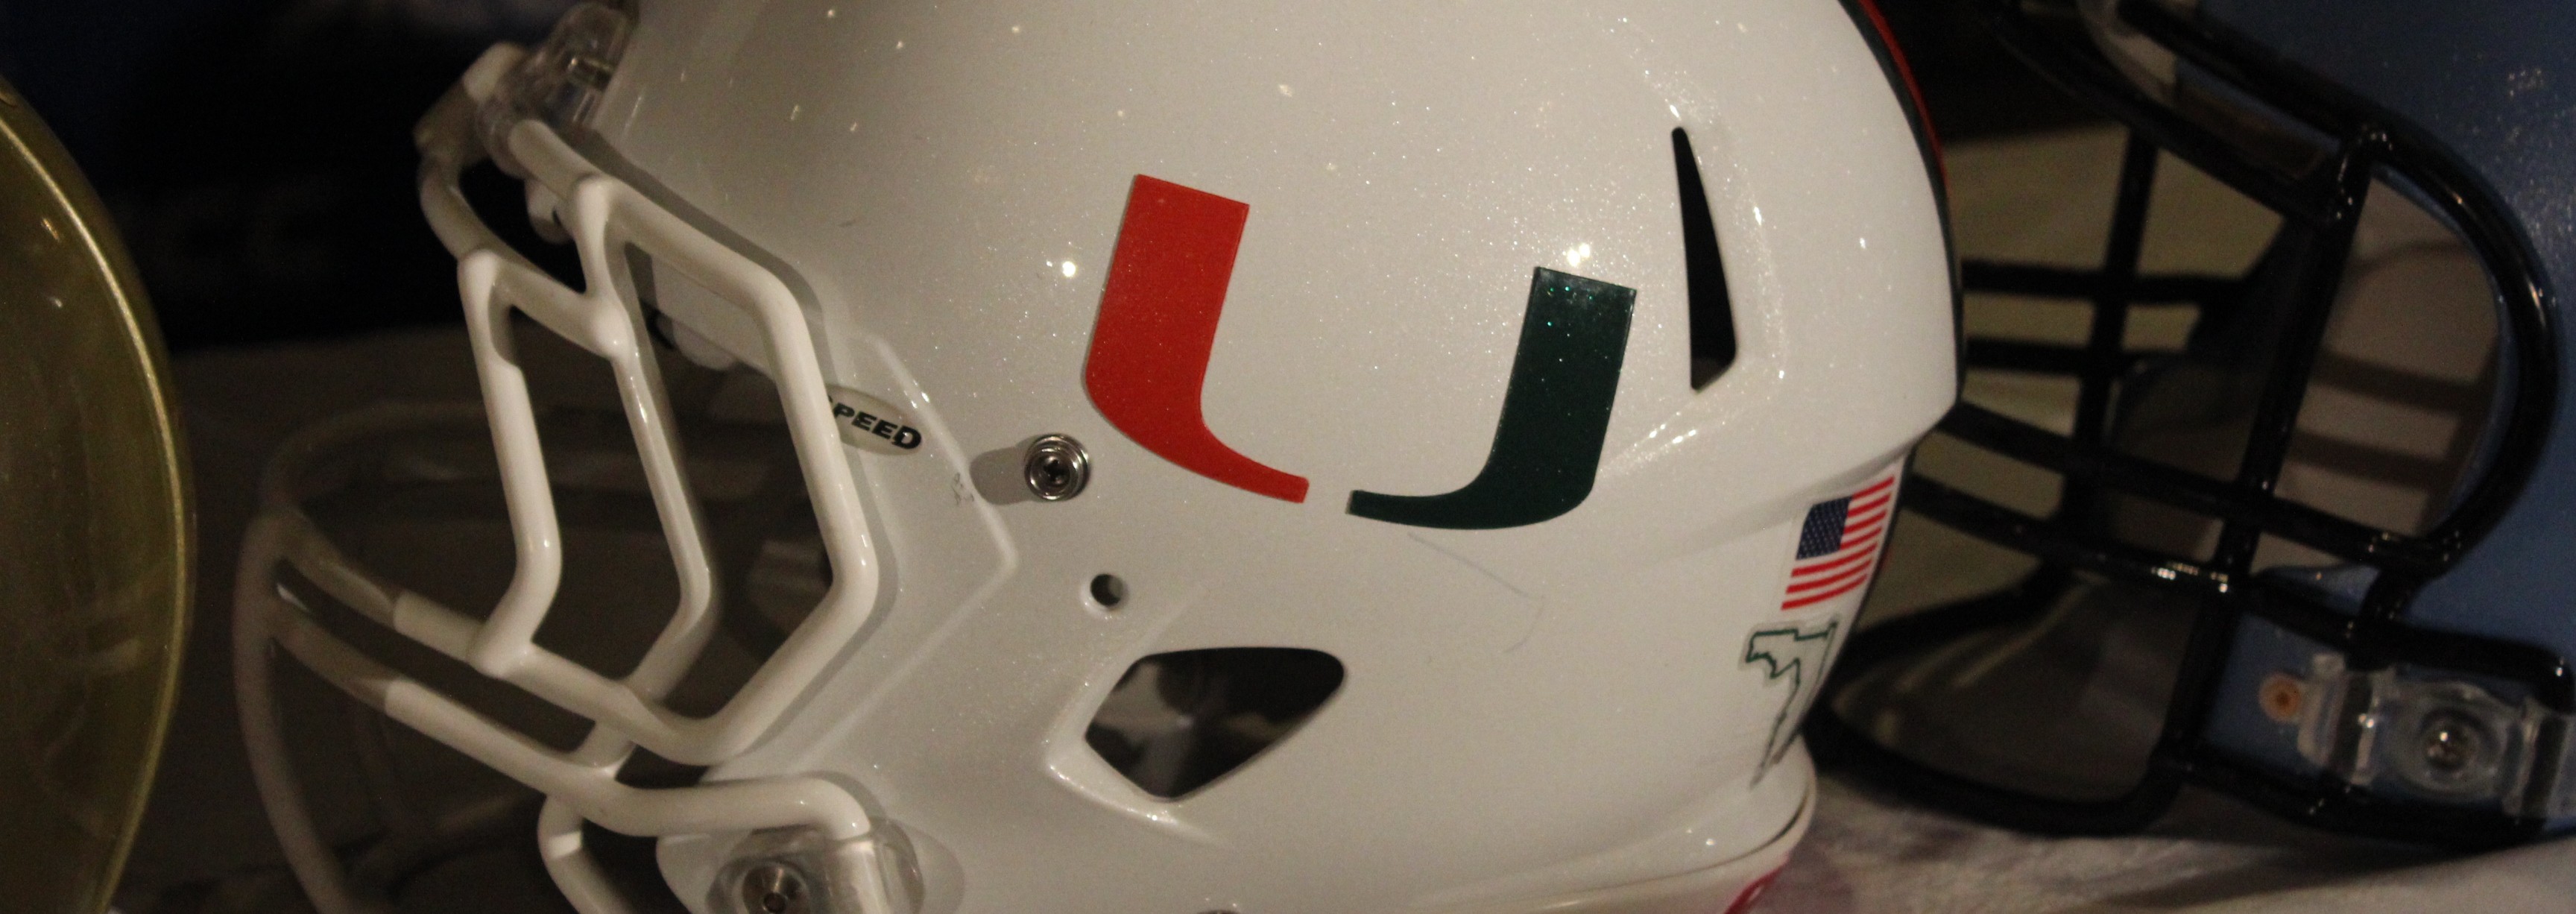 Miami Helmet 2014 ACC Kickoff Photo By Mark Blankenbaker Fitted